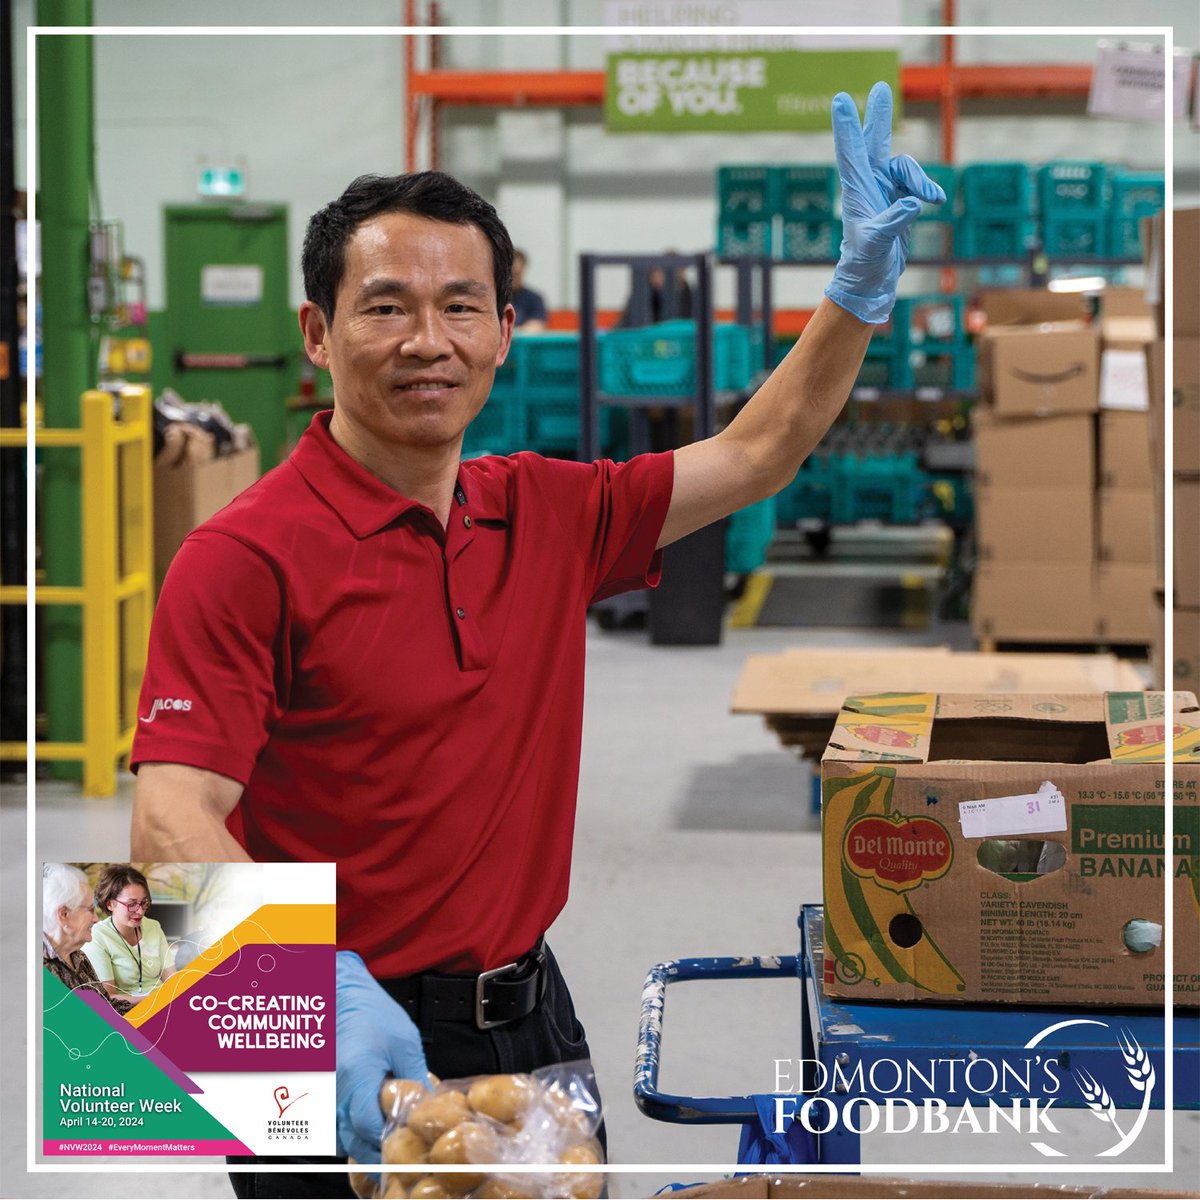 Here's a great picture of our new volunteer friend Longhui putting in some hours building hampers this week! 

We can't thank all our volunteers individually, but know that we appreciate ALL OF YOU! THANK YOU! #yeg #edmonton #yegfoodbank #feedyeg #NVW2024 #EveryMomentMatters